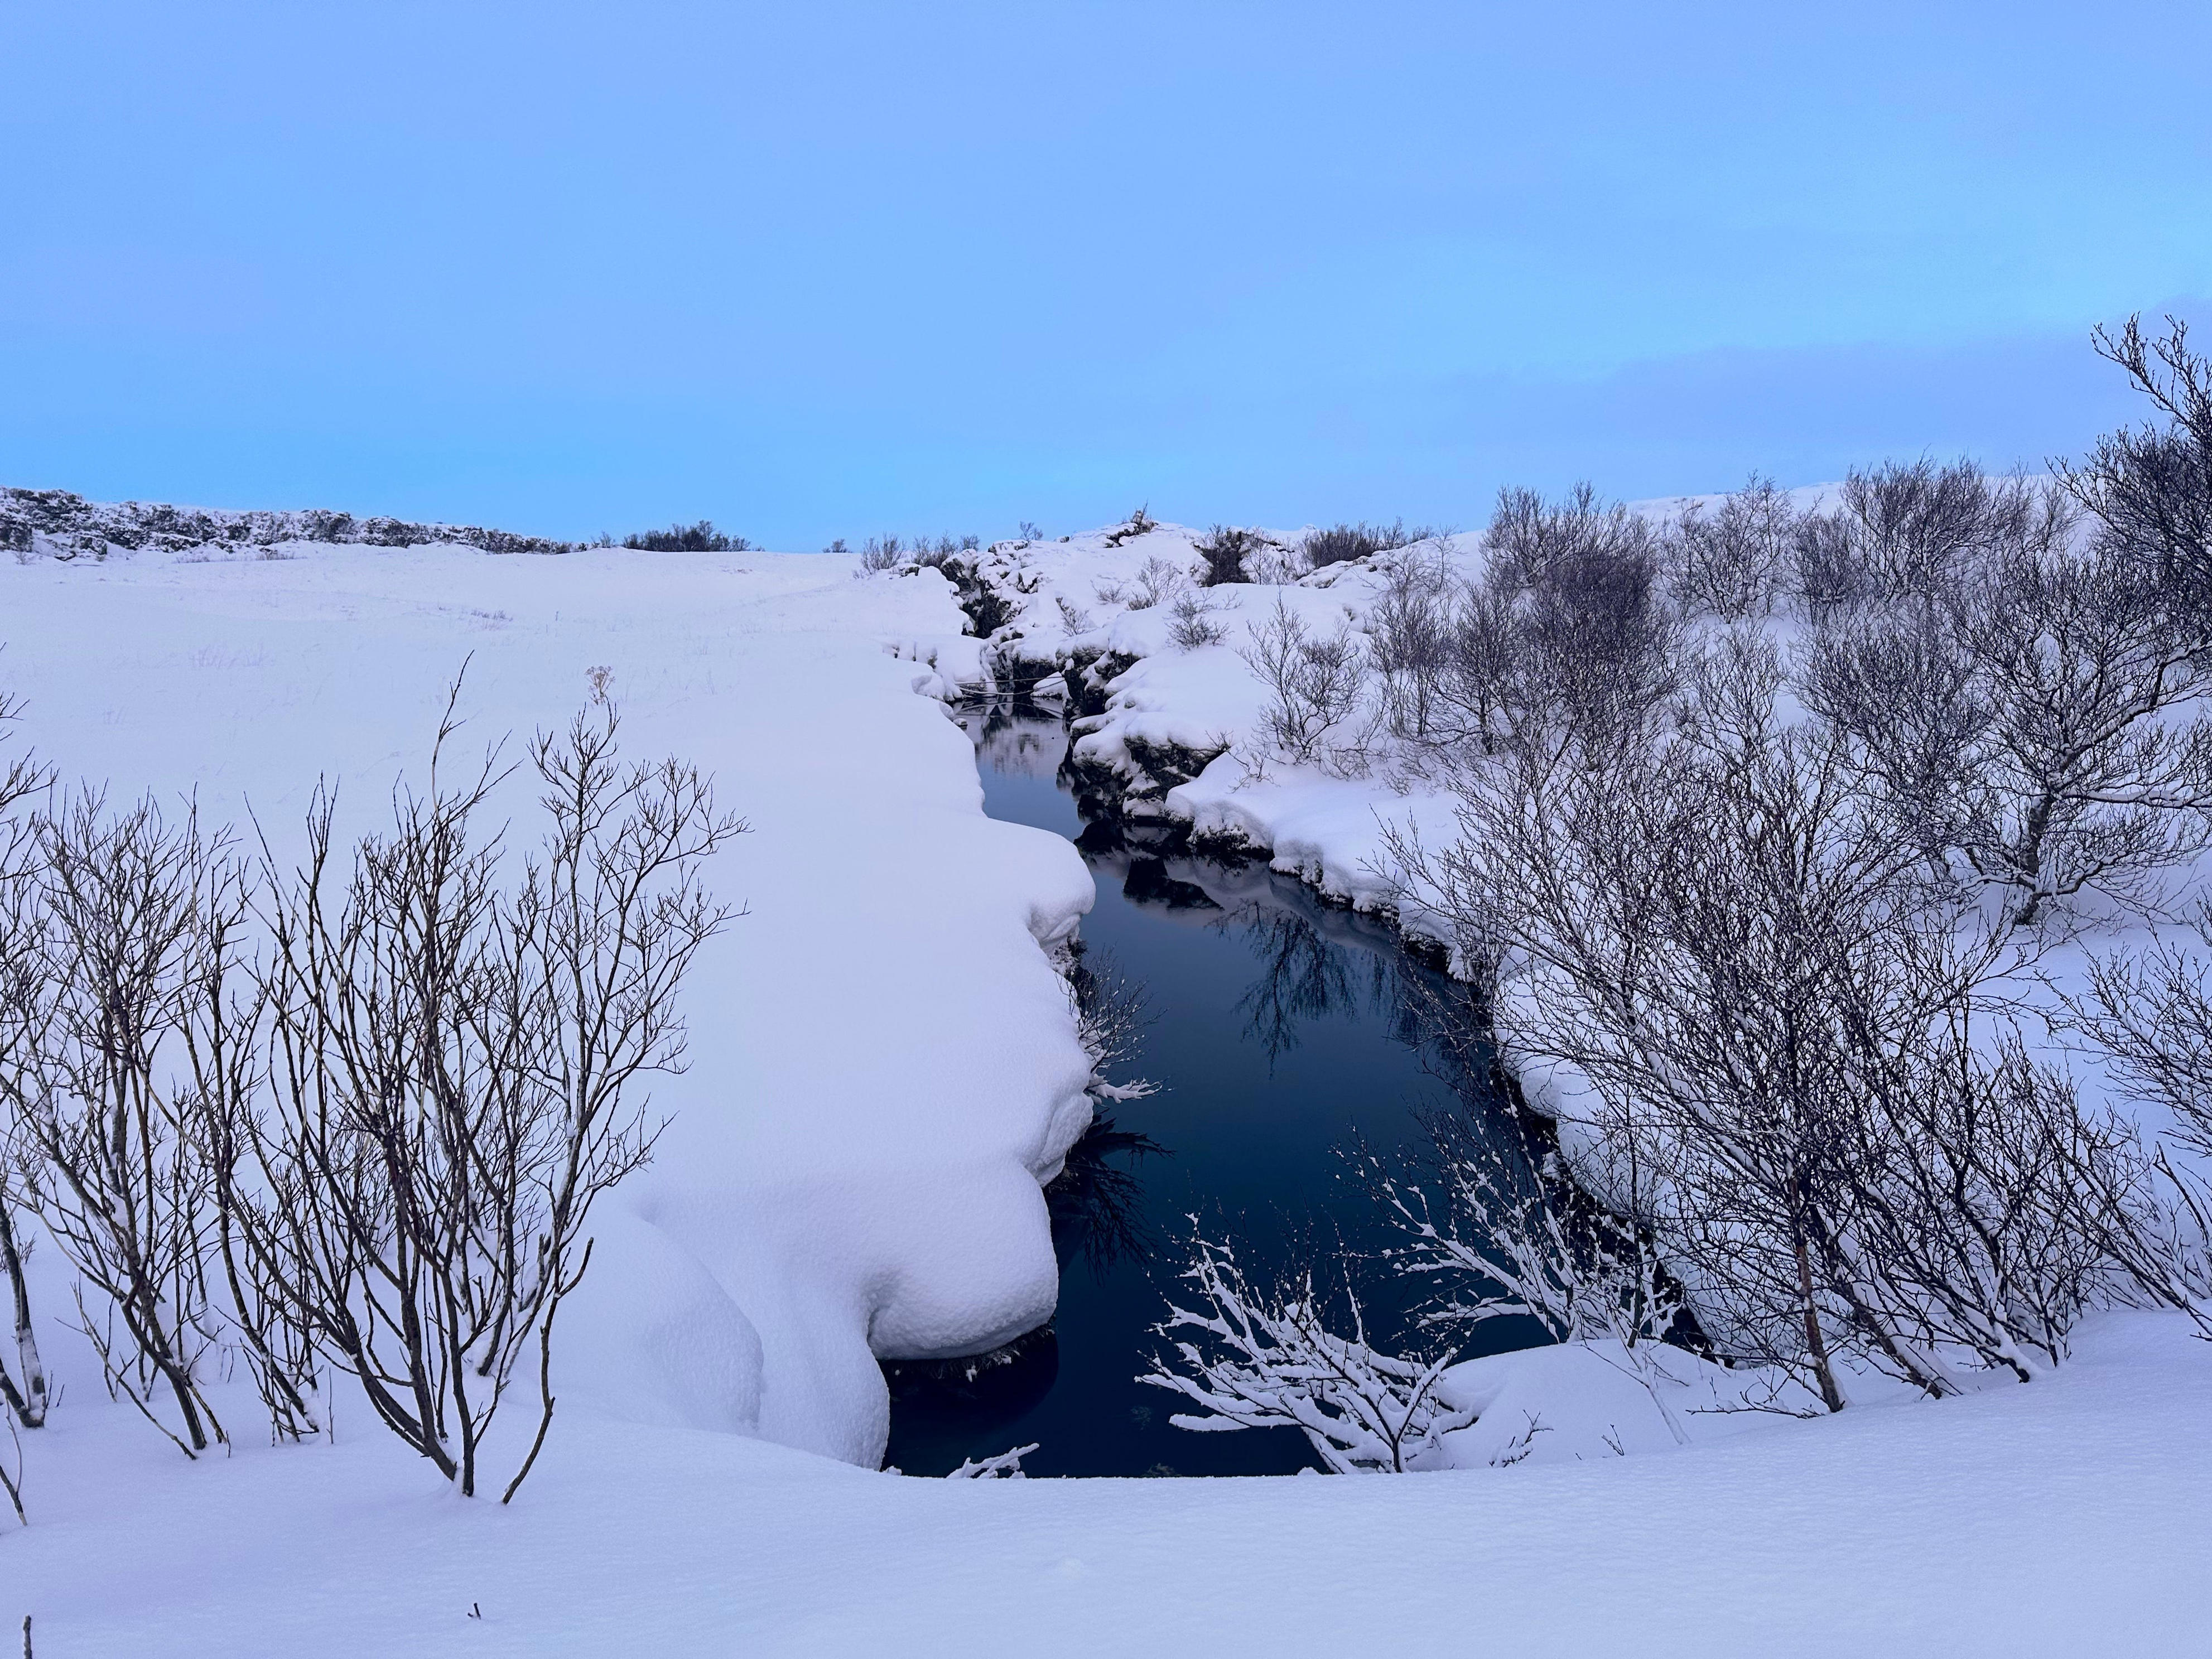 <p>Though it was freezing, I was excited to go snorkeling between the North American and Eurasian tectonic plates. I paid $150 to go snorkeling and $30 for a diver to snap photos with a company called <a href="https://www.dive.is/">Dive.IS</a>.</p><p>Once I got in my wetsuit, which was surprisingly warm, the instructor taught me about how the tectonic plates shifted. Then, we set out on the 30-minute snorkeling journey.</p><p>The buoyancy of the wetsuit made it easy to stay afloat, and I fully enjoyed the clear, refreshing water.</p>